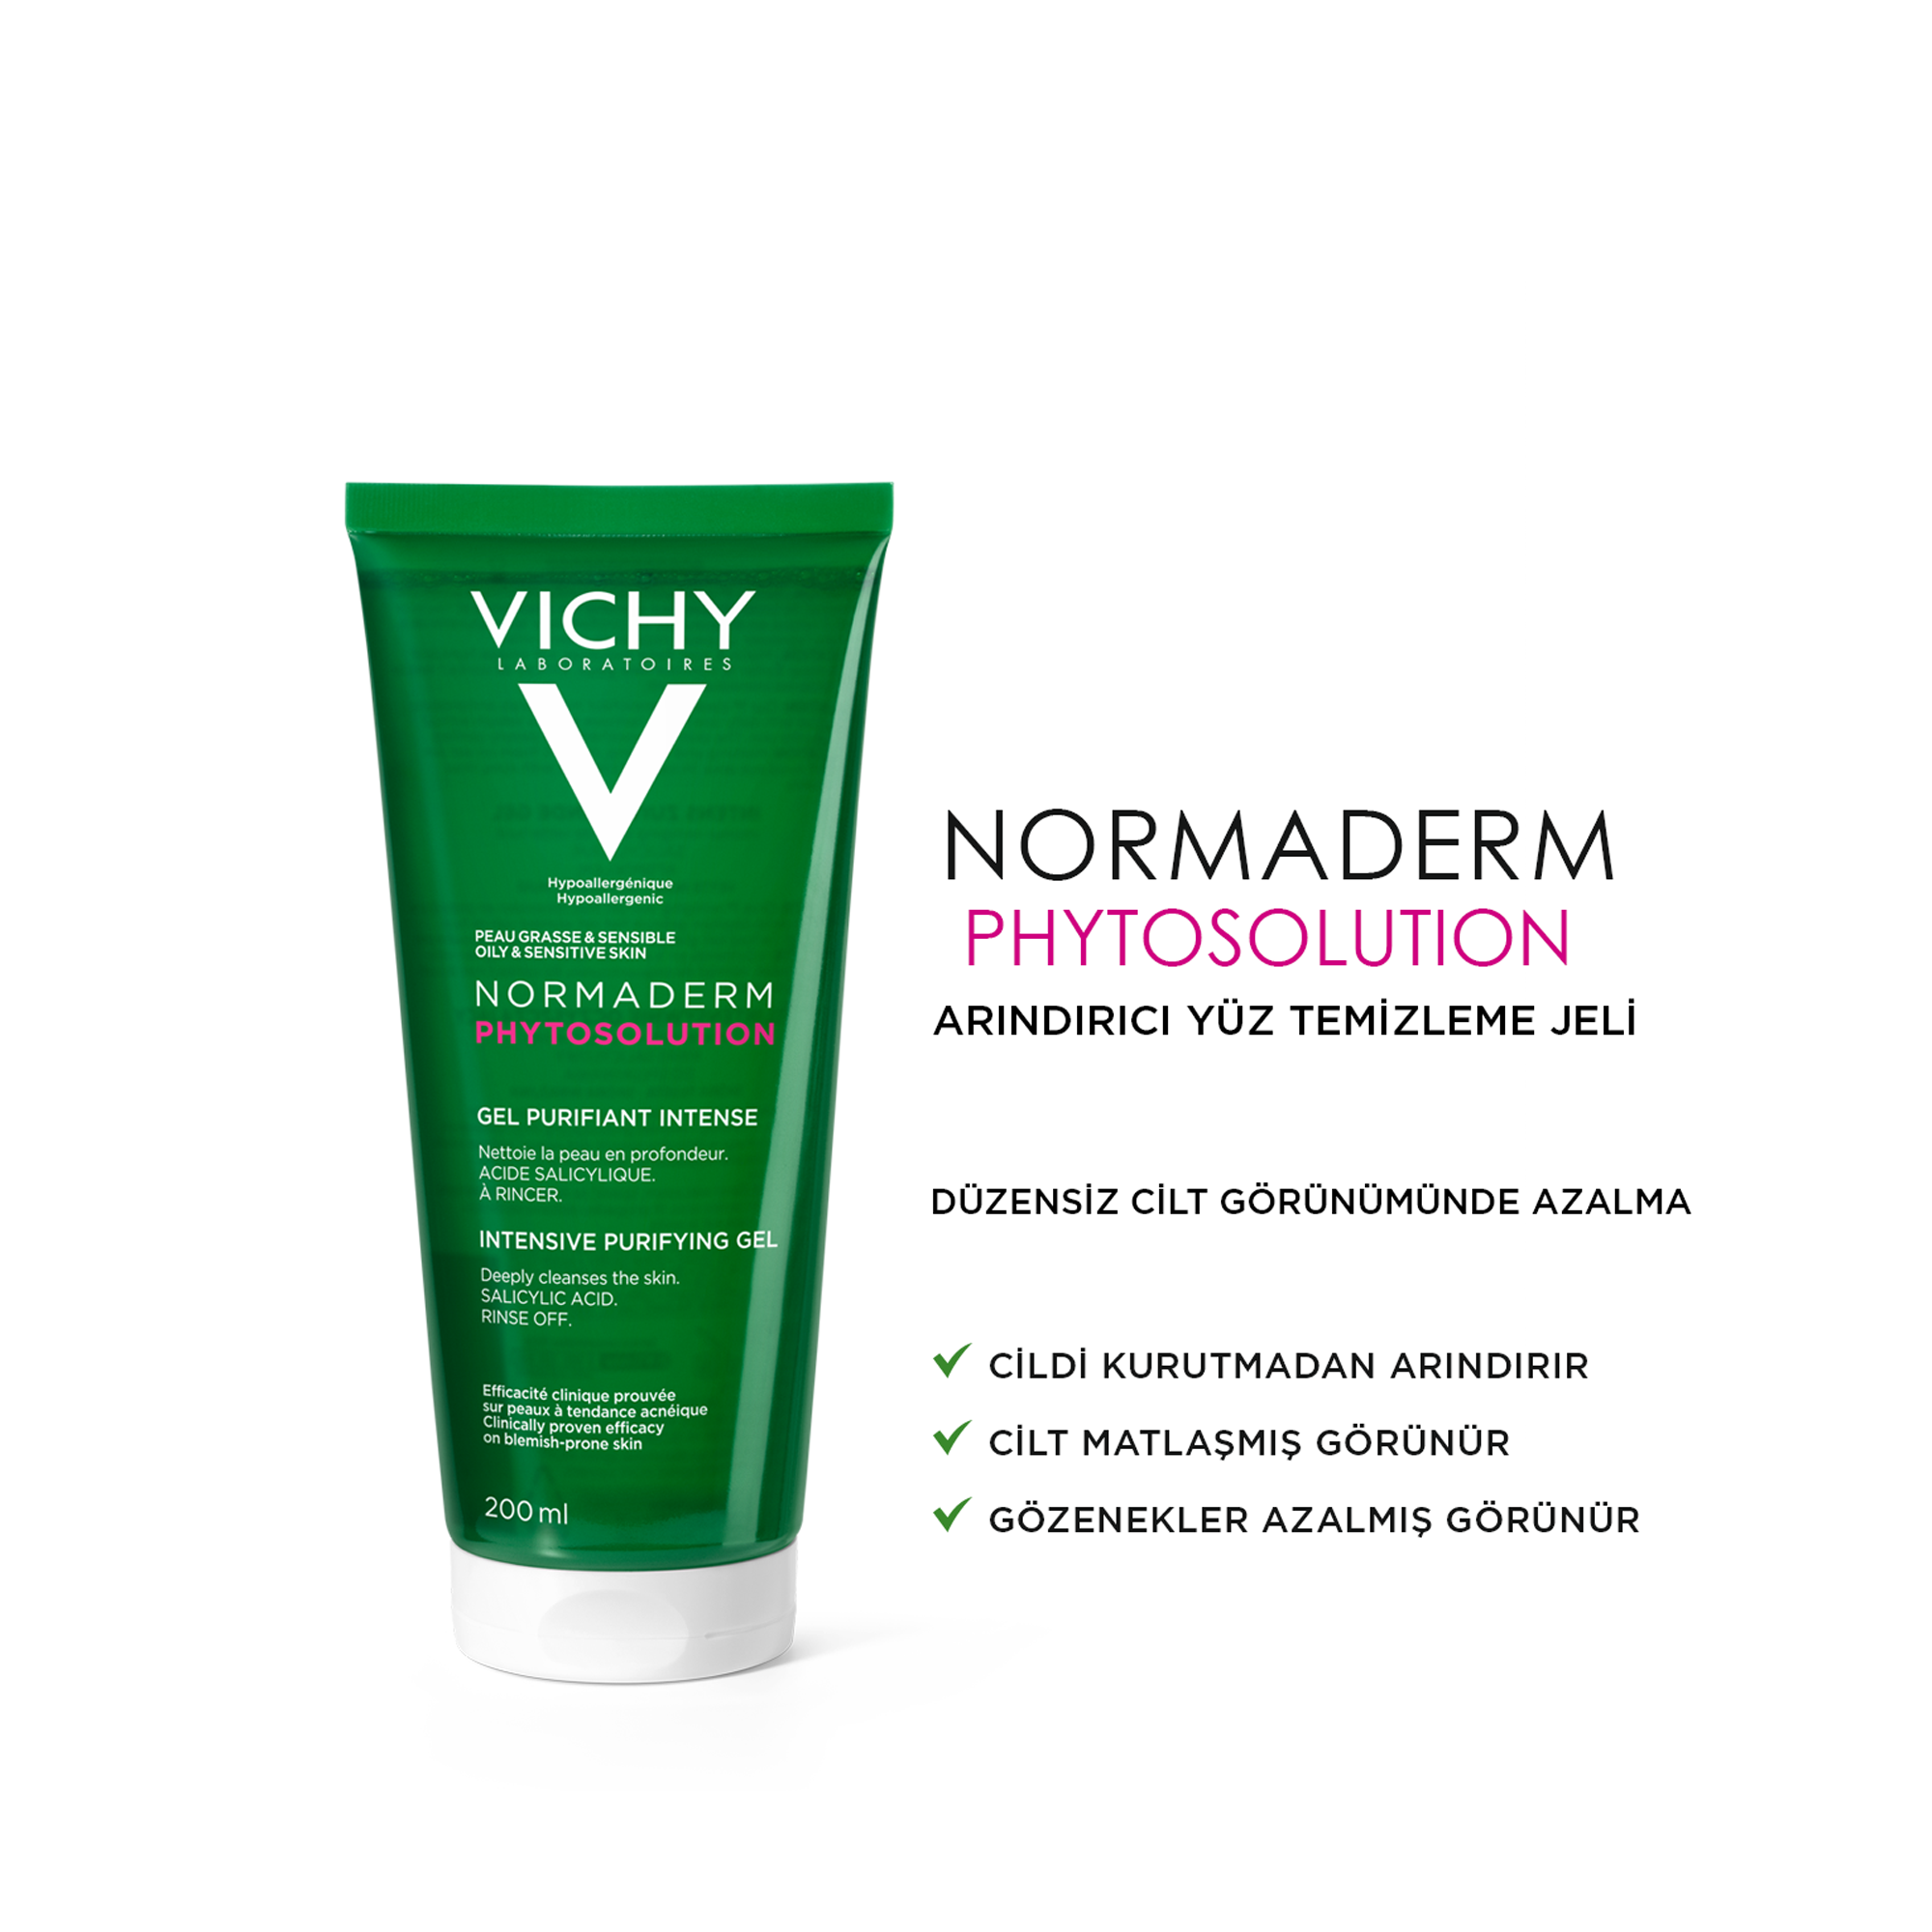 Normaderm phytosolution intensive purifying gel. Виши умывалка Normaderm. Виши Нормадерм гель. Vichy Normaderm phytosolution. Vichy Normaderm phytosolution крем.